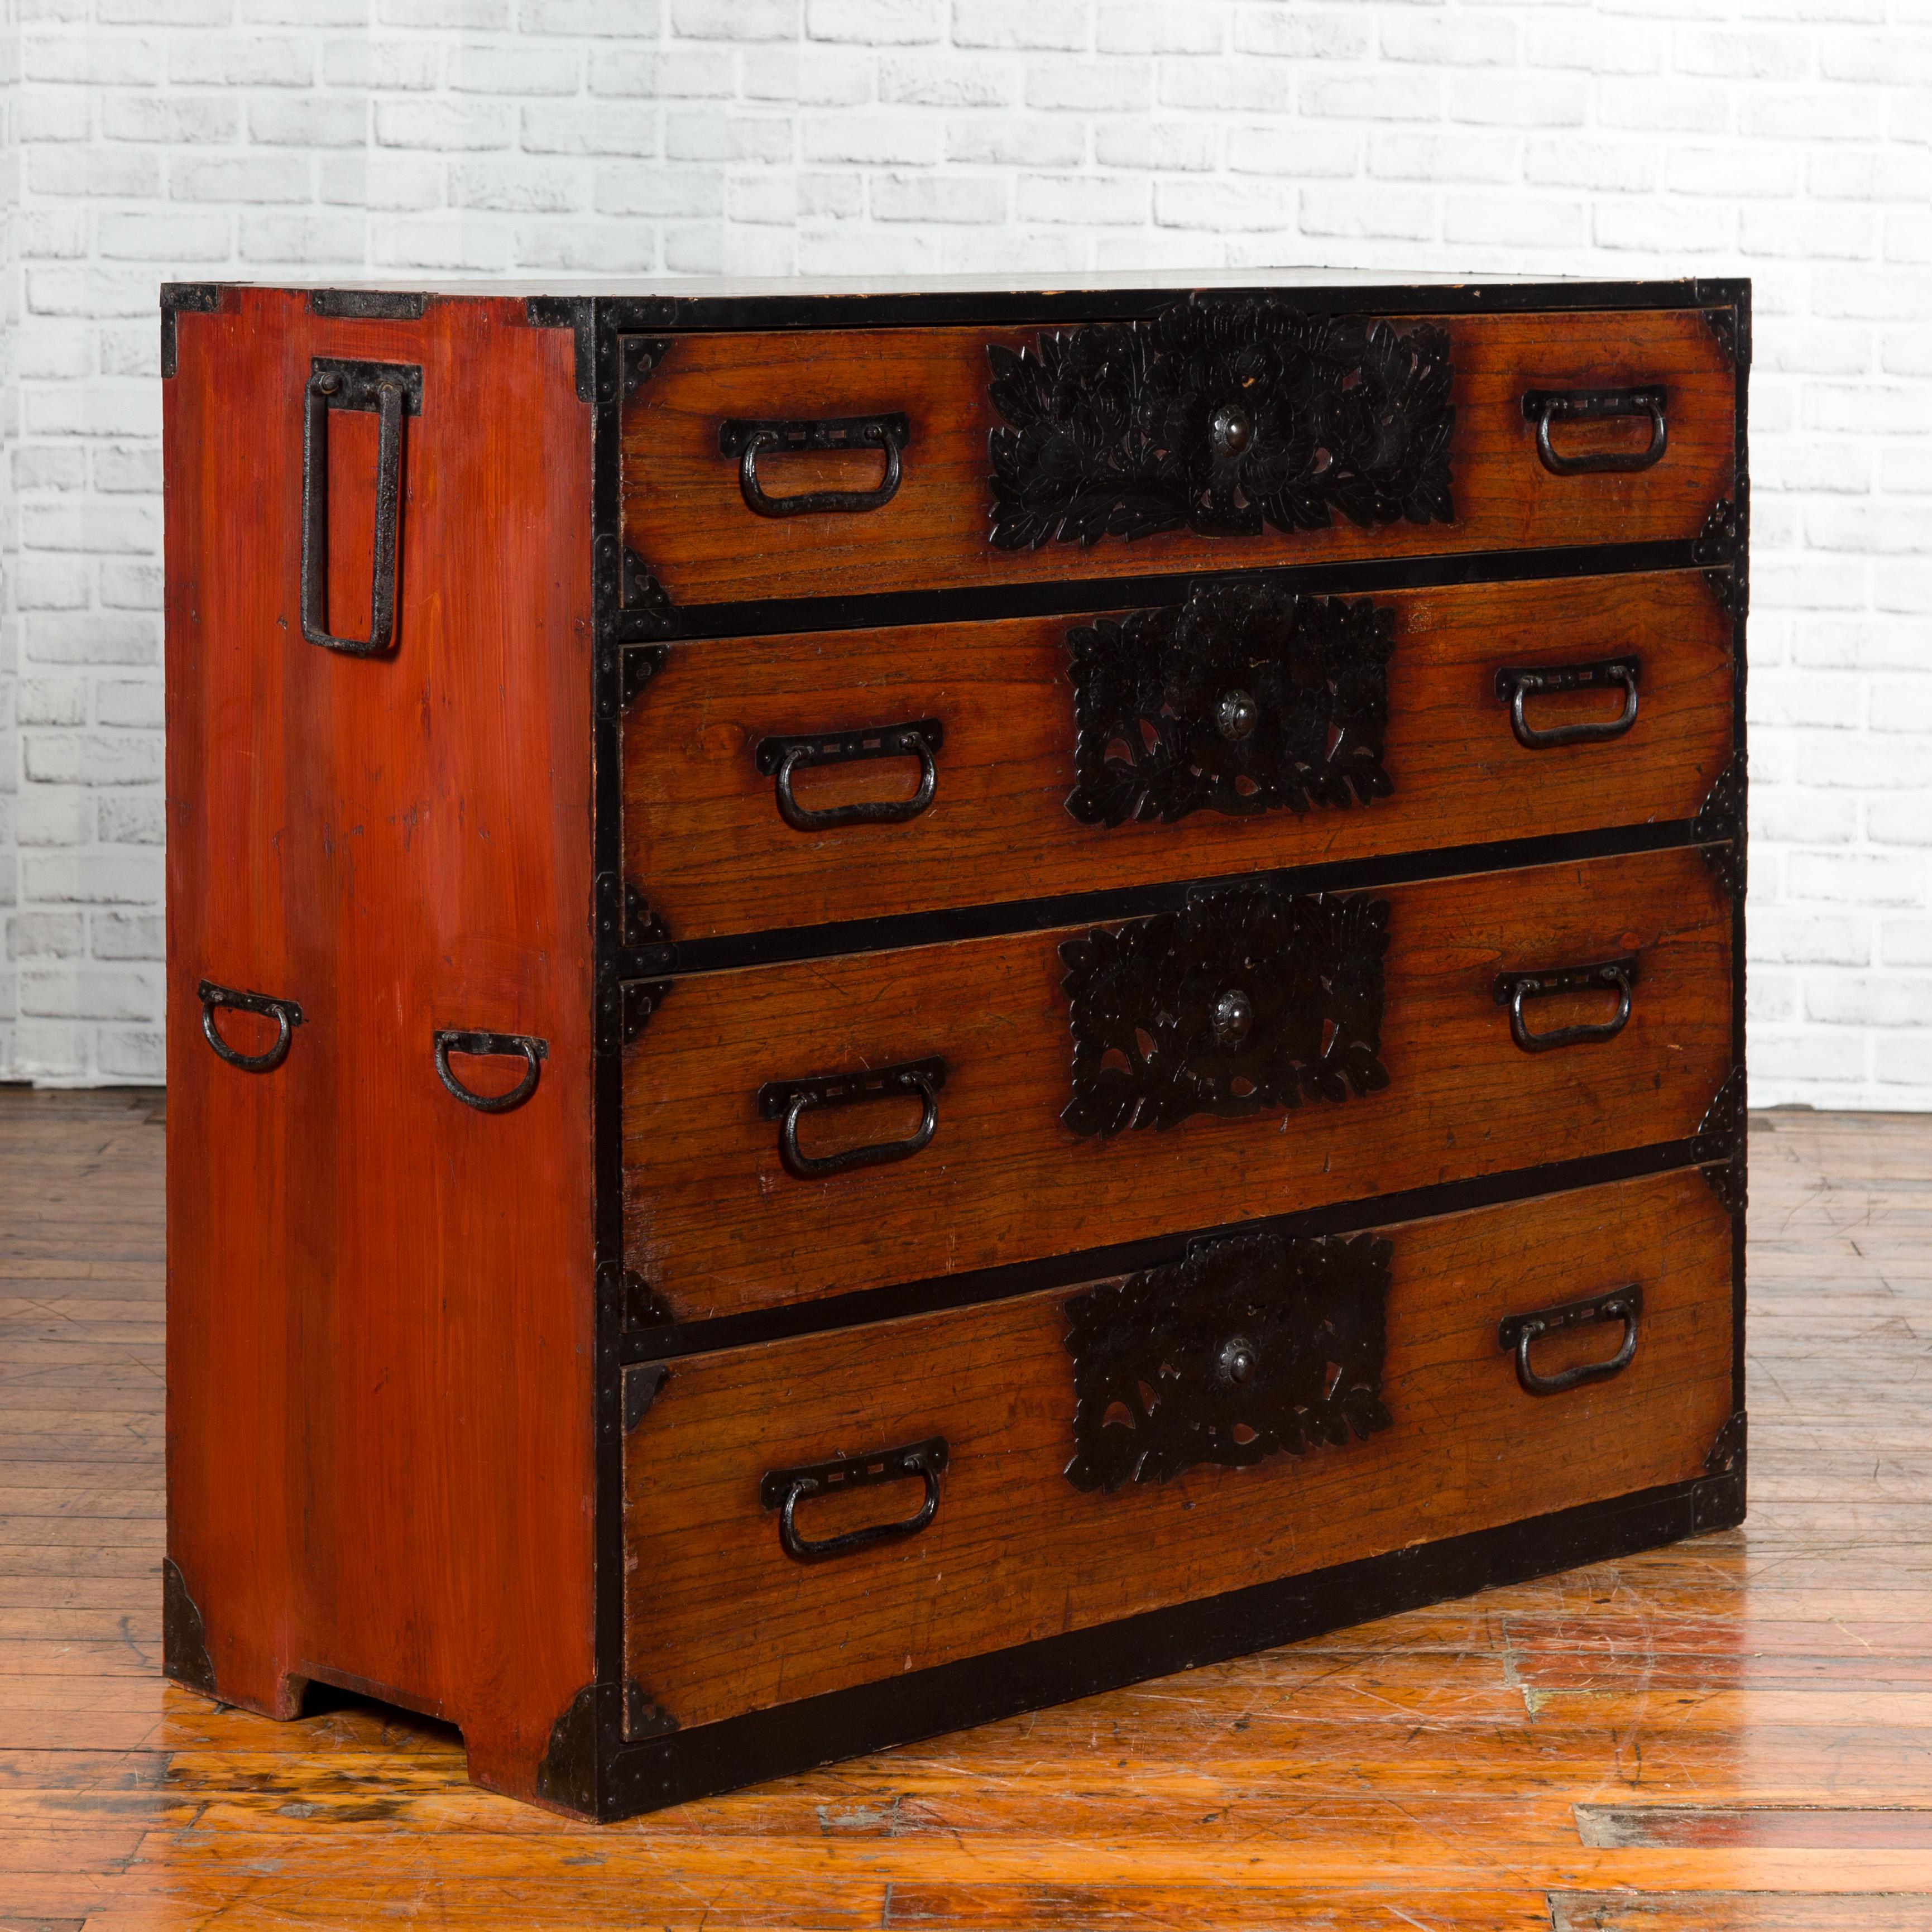 A Japanese 19th century keyaki wood Sendai clothing tansu (Isho-dansu) with four drawers and elaborate handcut iron hardware. Born during the 19th century in the Sendai prefecture, this wooden Tansu chest is a Fine example of Japan's traditional